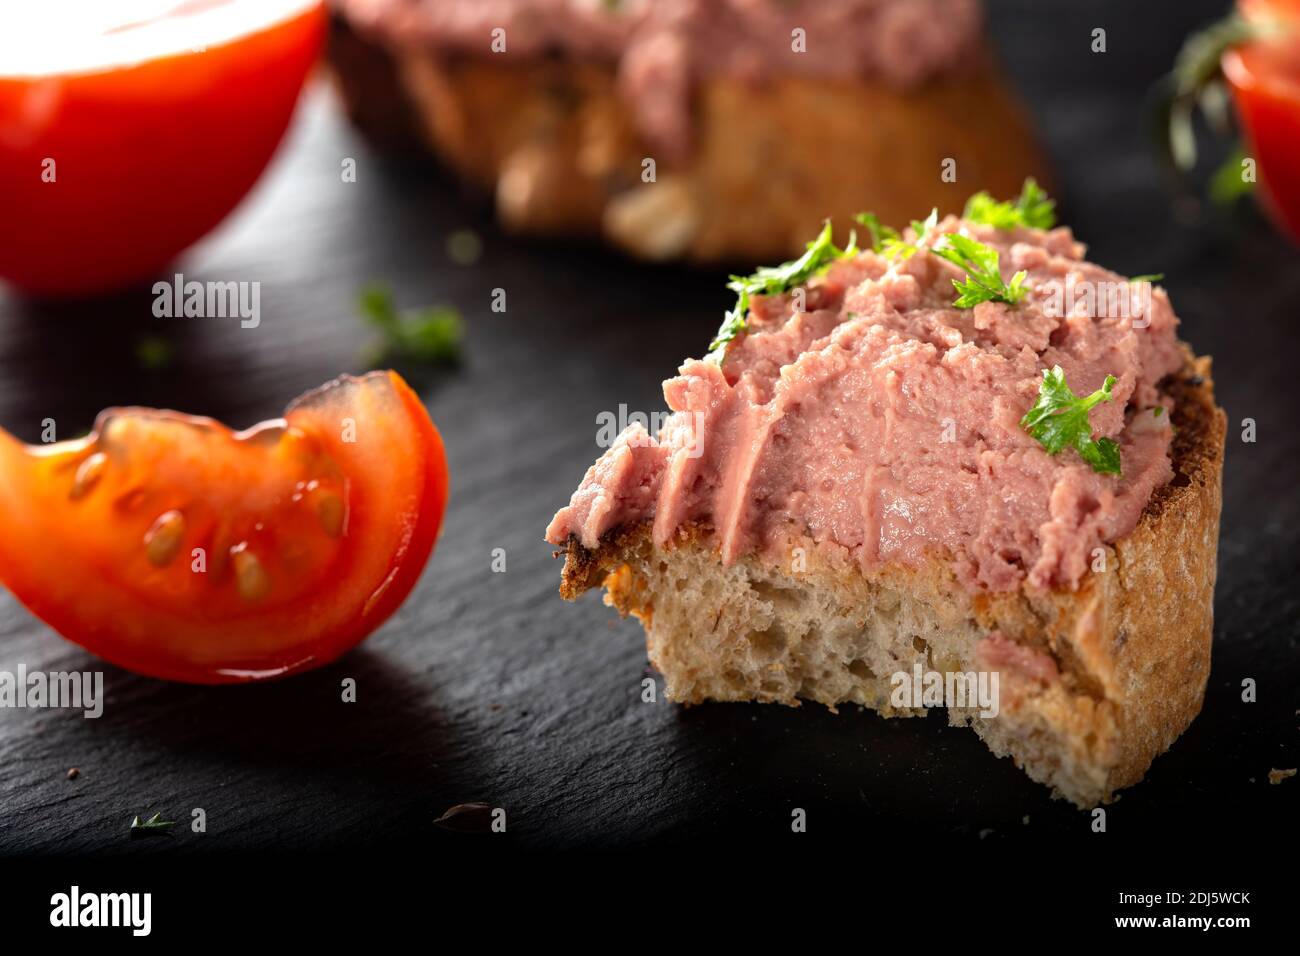 Bitten toast with pork pate, tomato and herbs on dark slate - close up view Stock Photo